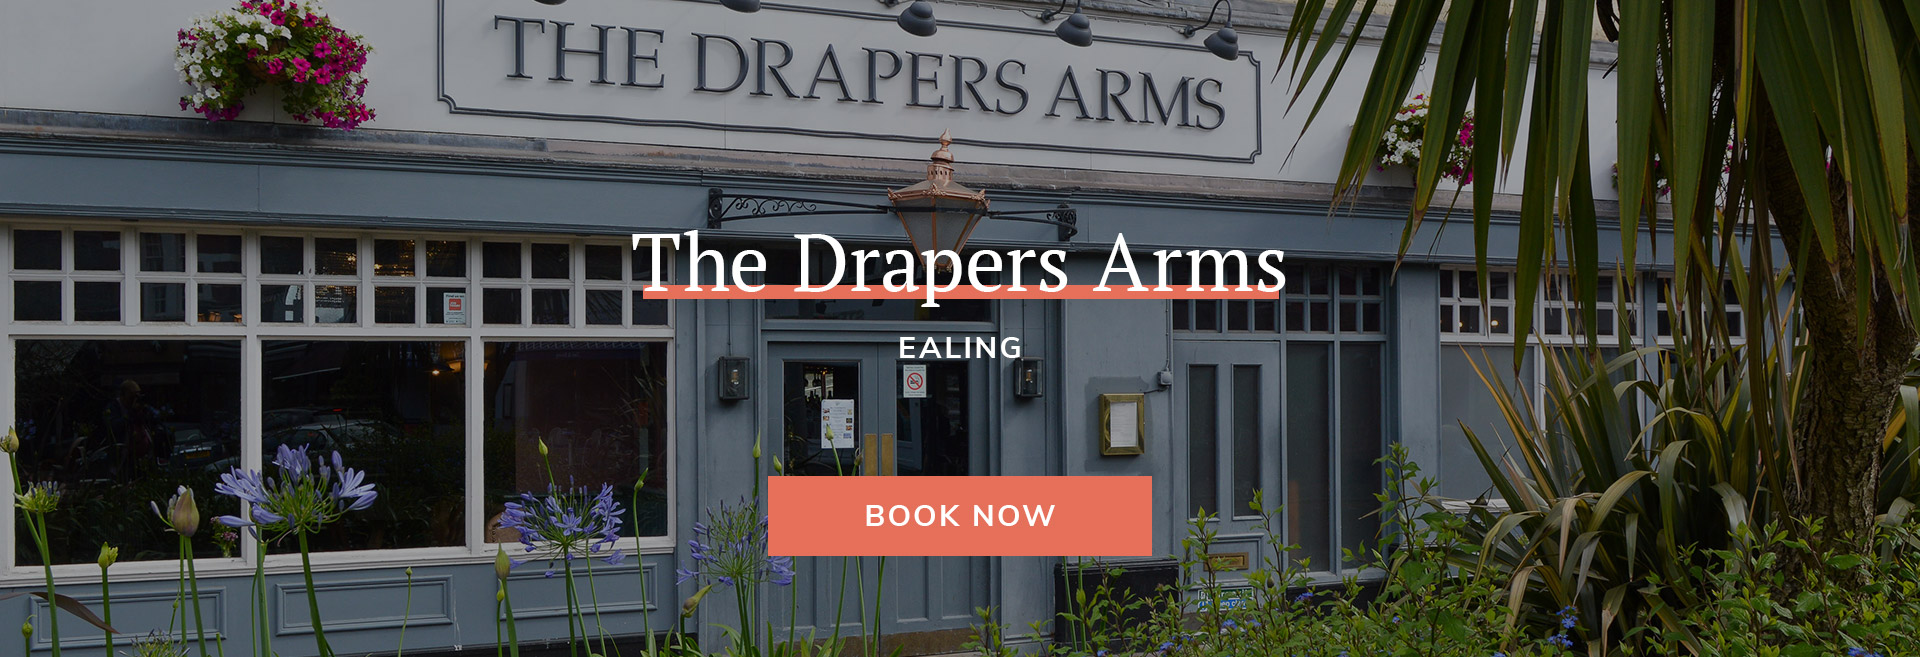 The Drapers Arms Banner 1